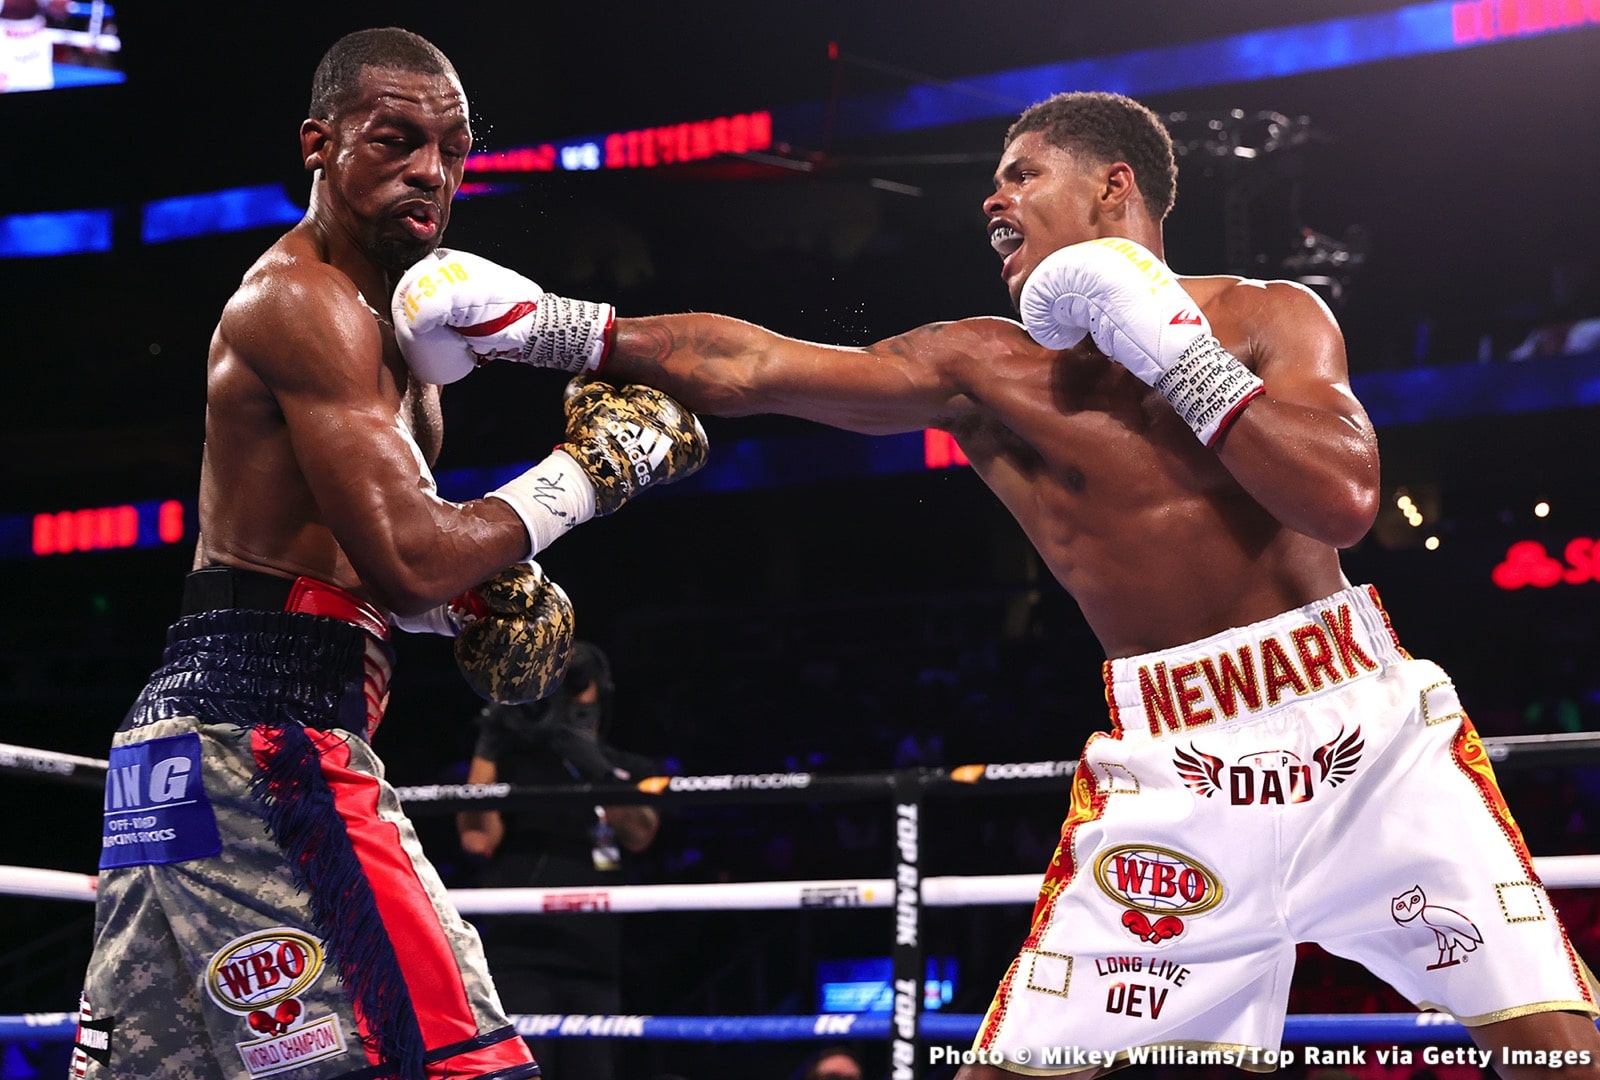 Image: Results: Jamel Herring uncertain about future after losing title to Stevenson